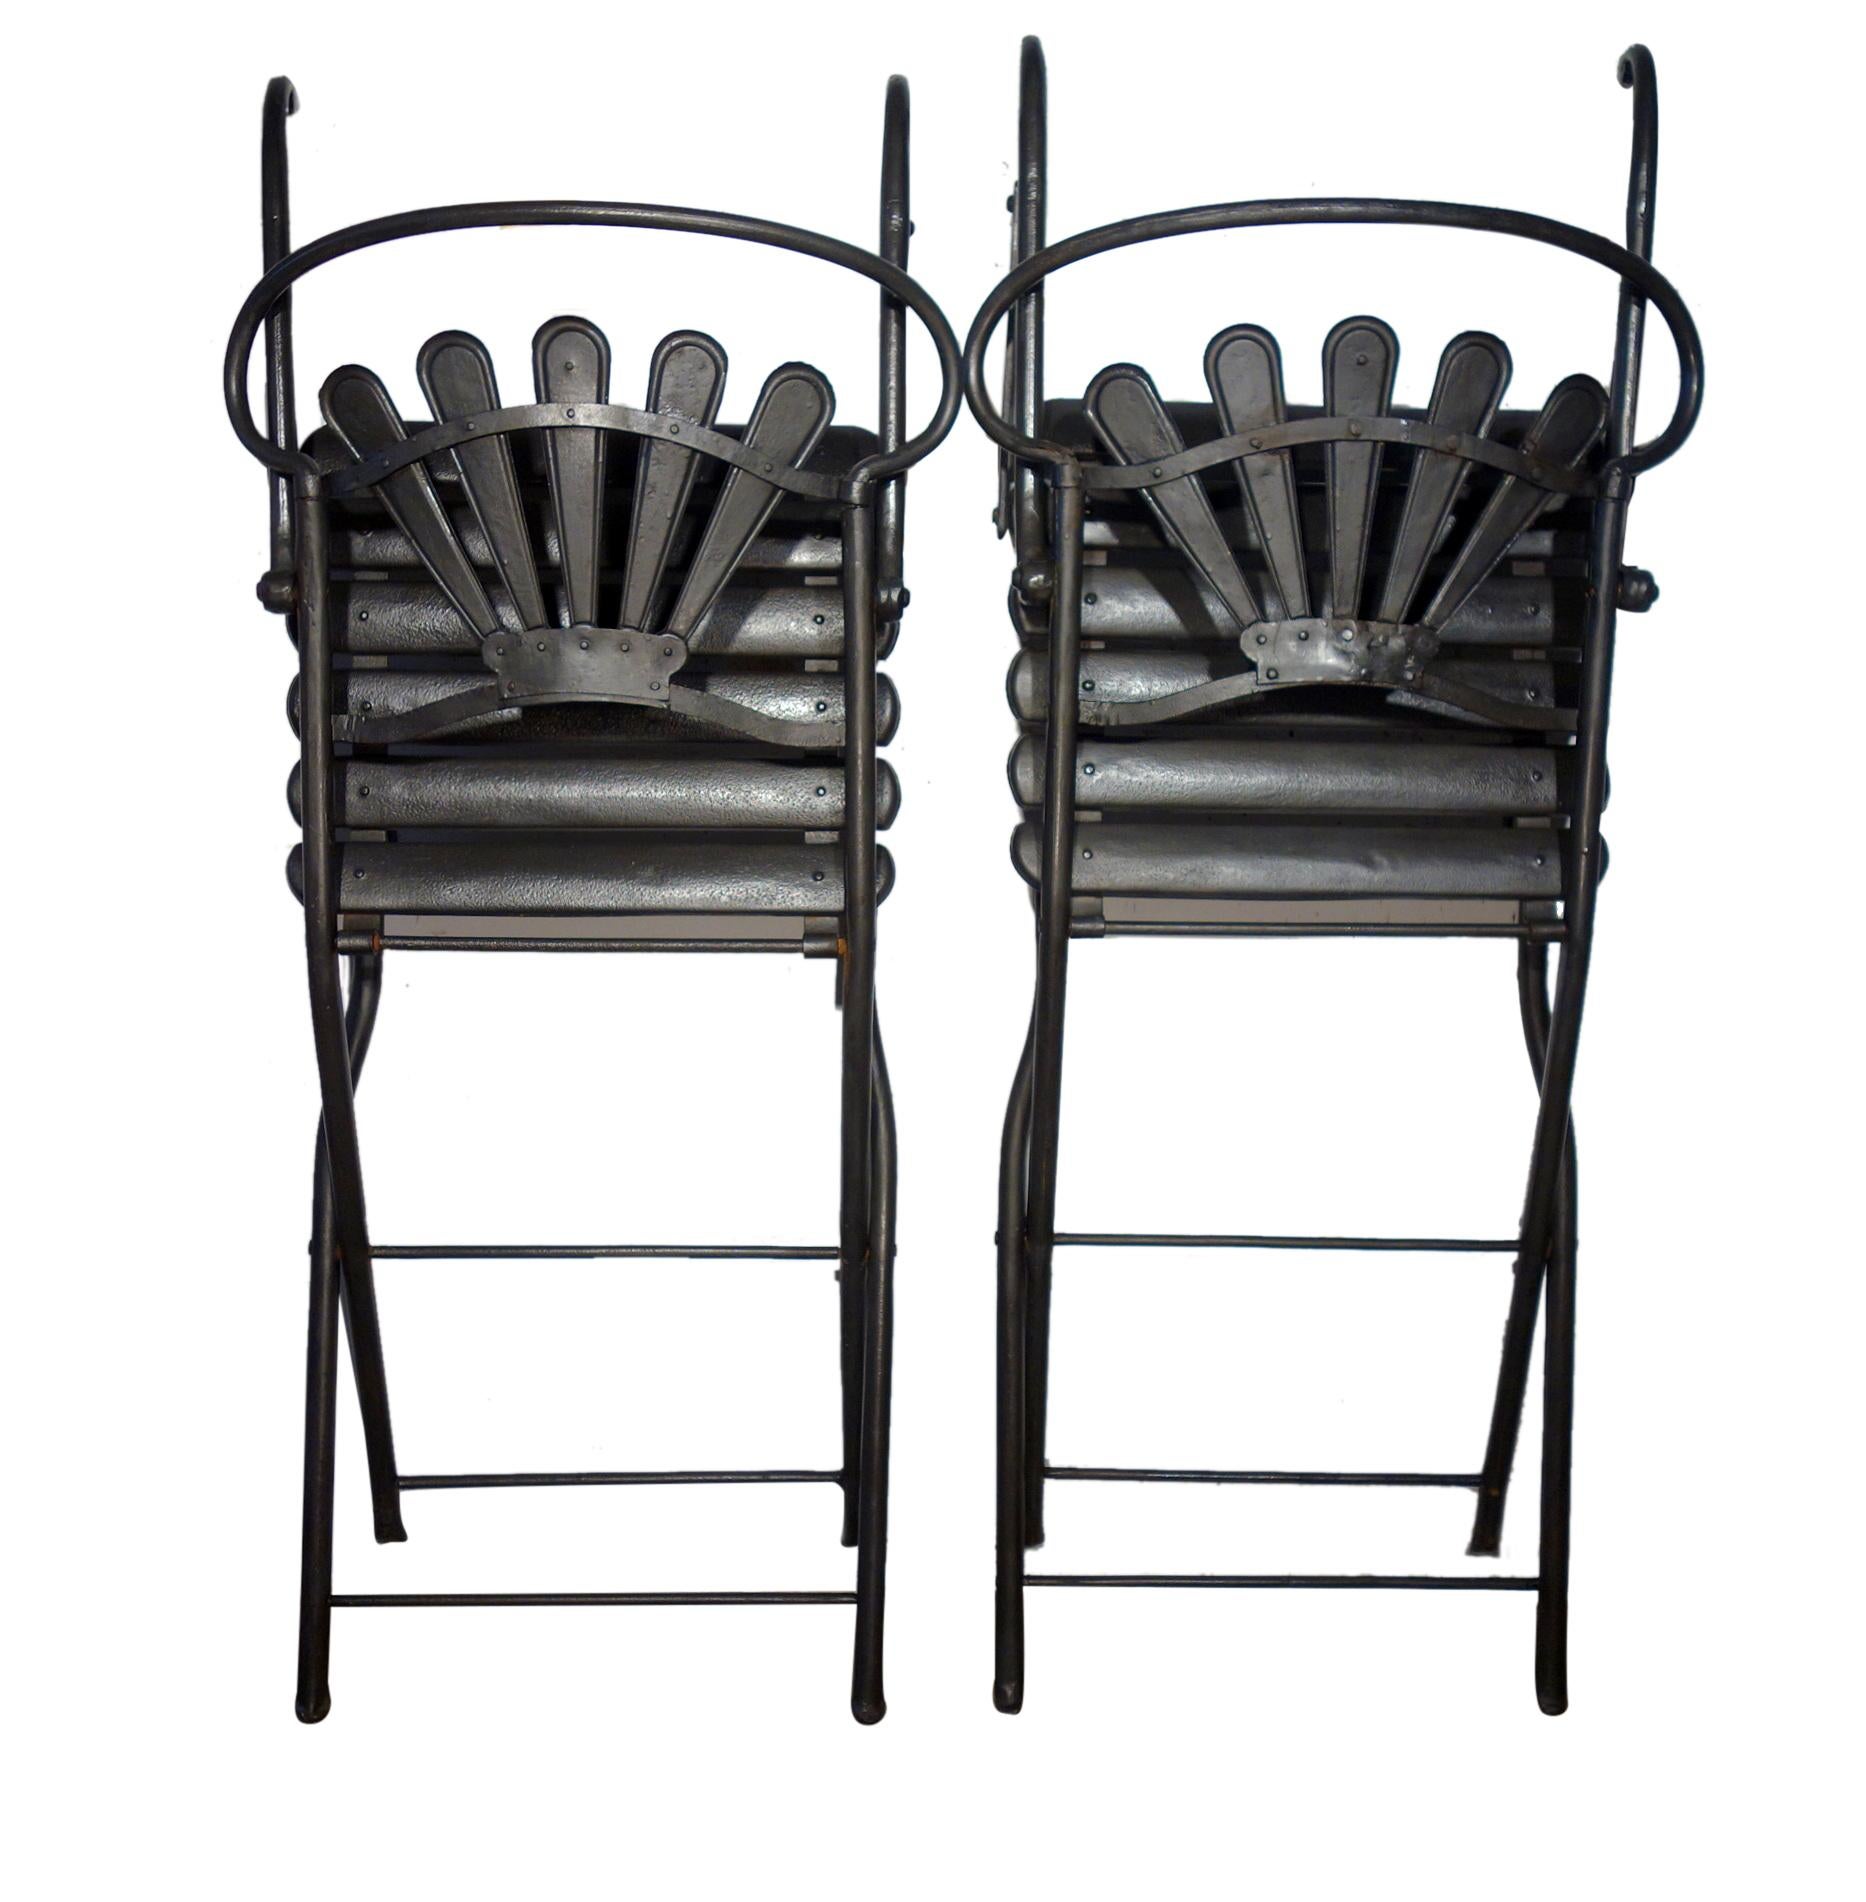 Forged Early Mid Century Italian Wrought Iron Folding Armchair Pair by Carlo Crespi For Sale